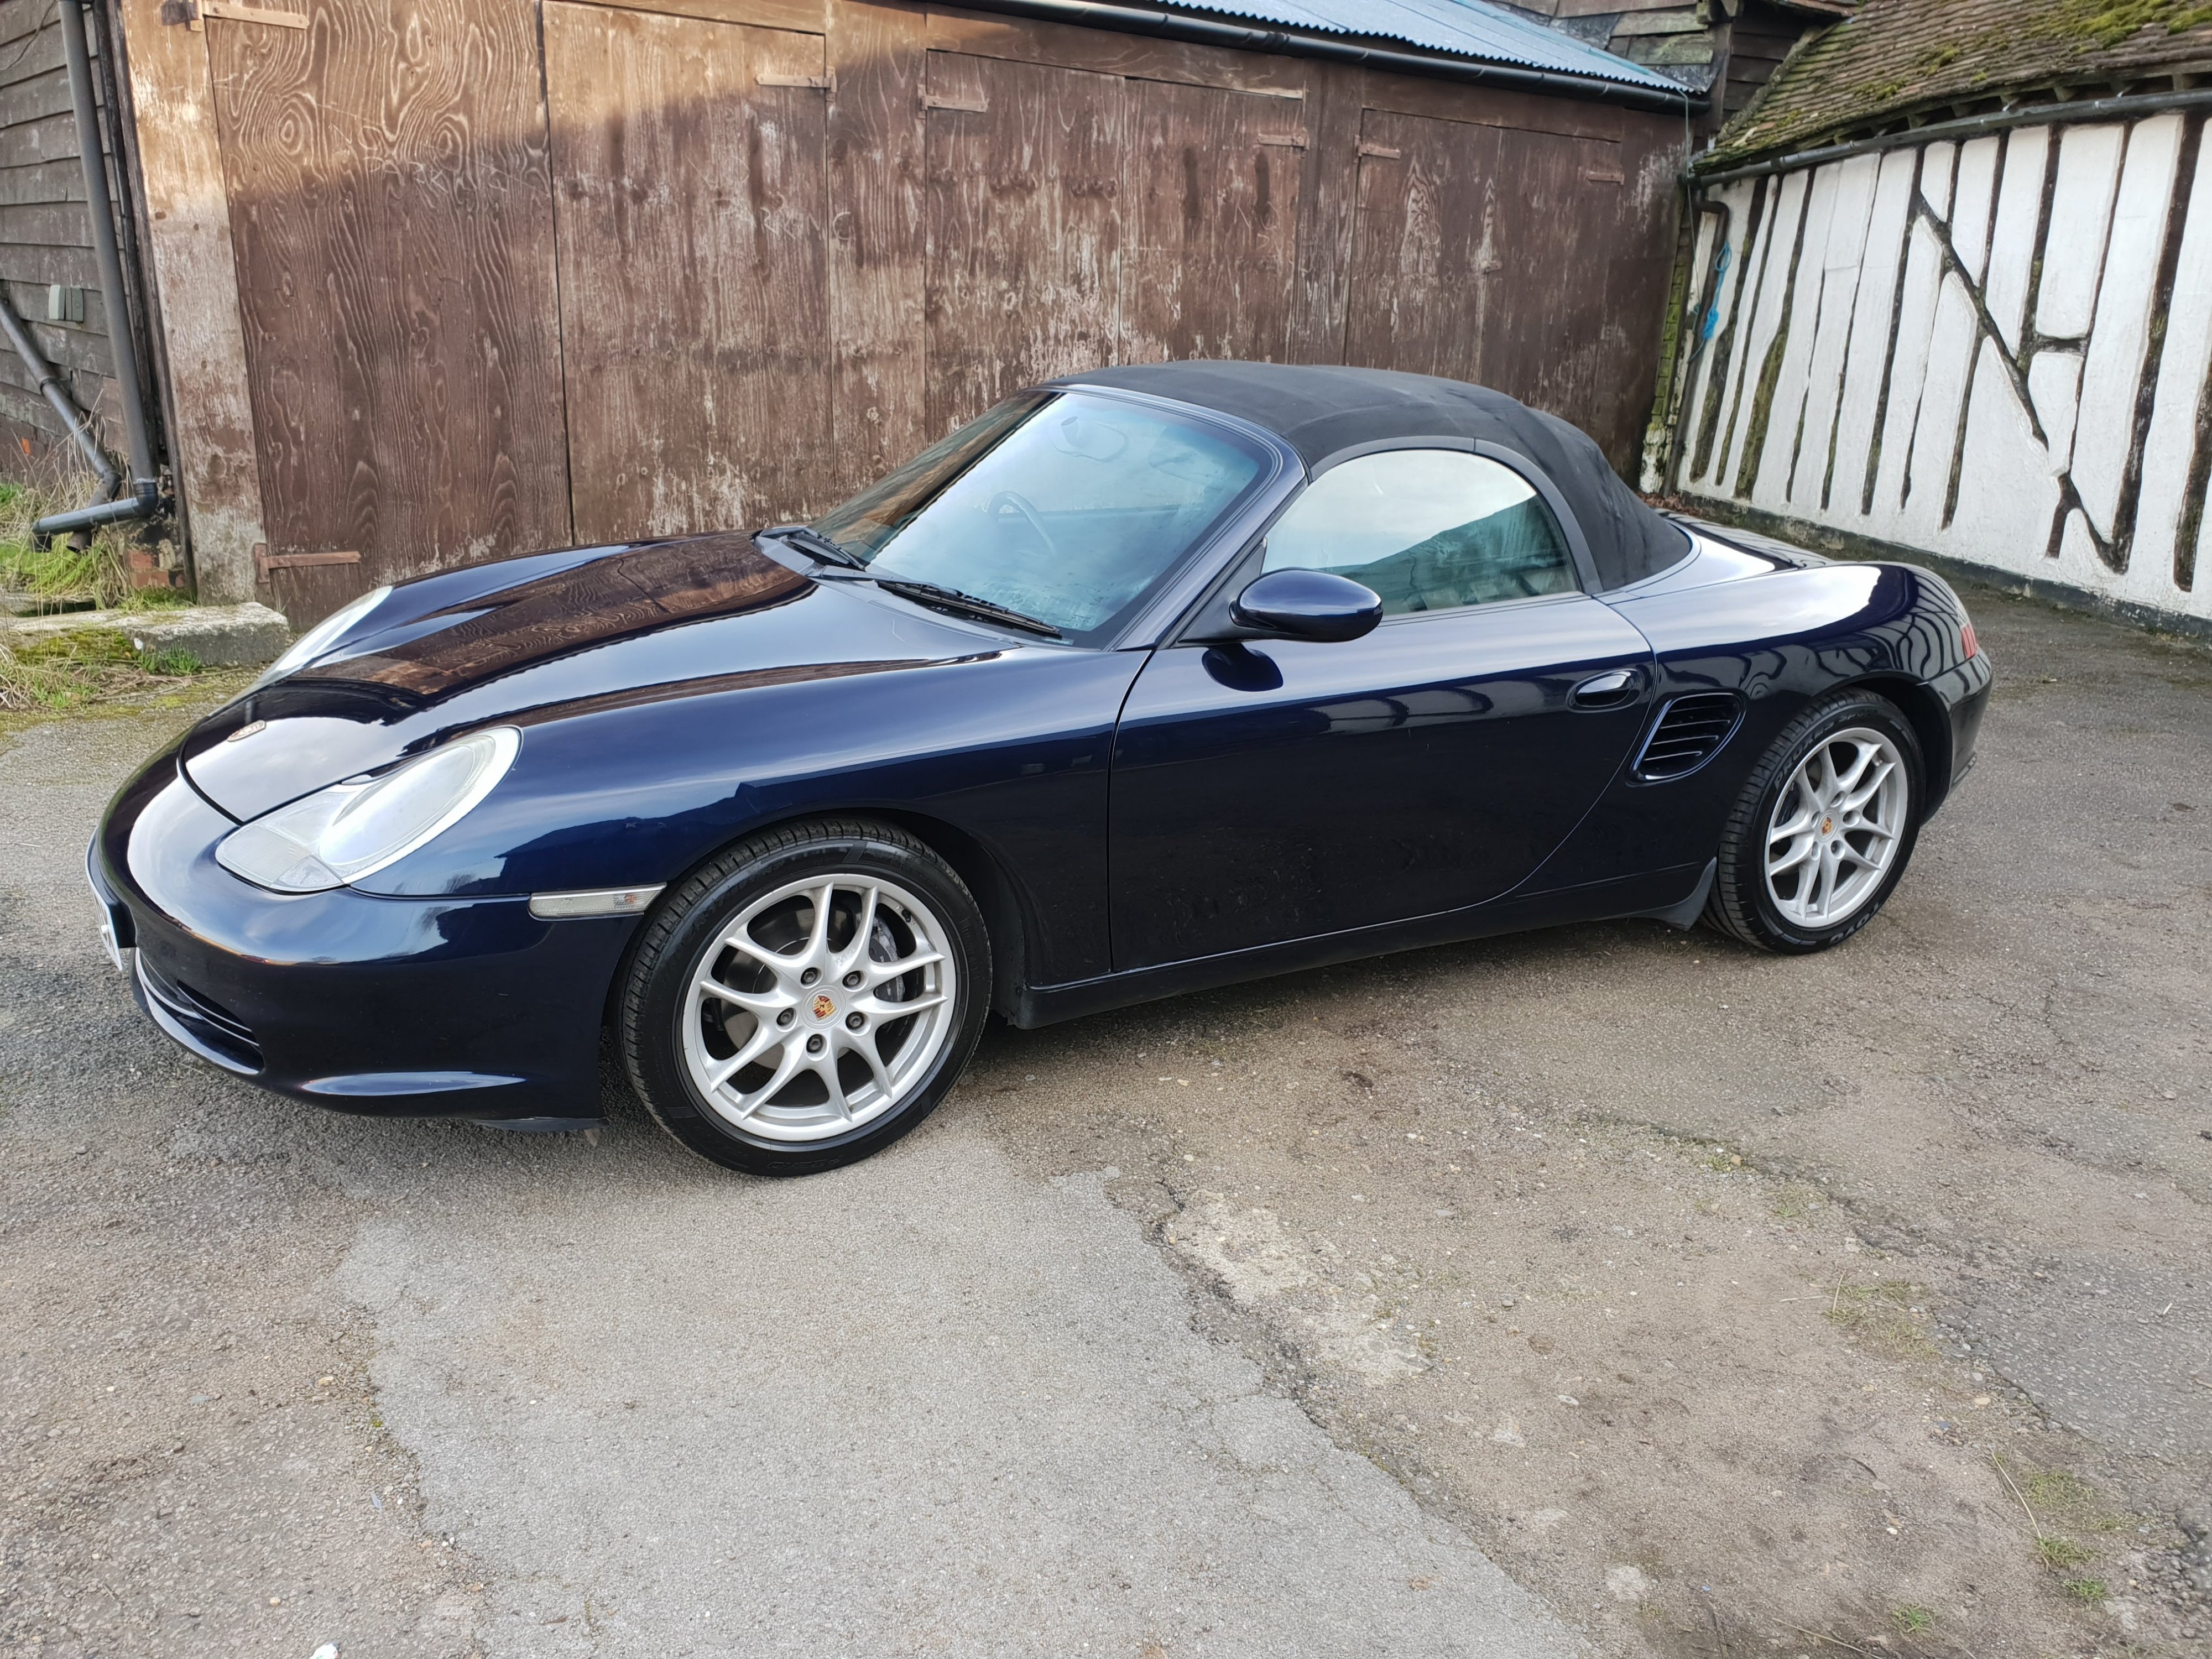 Porsche Boxster 2.7 986.2 SOLD Other Vehicles for Sale